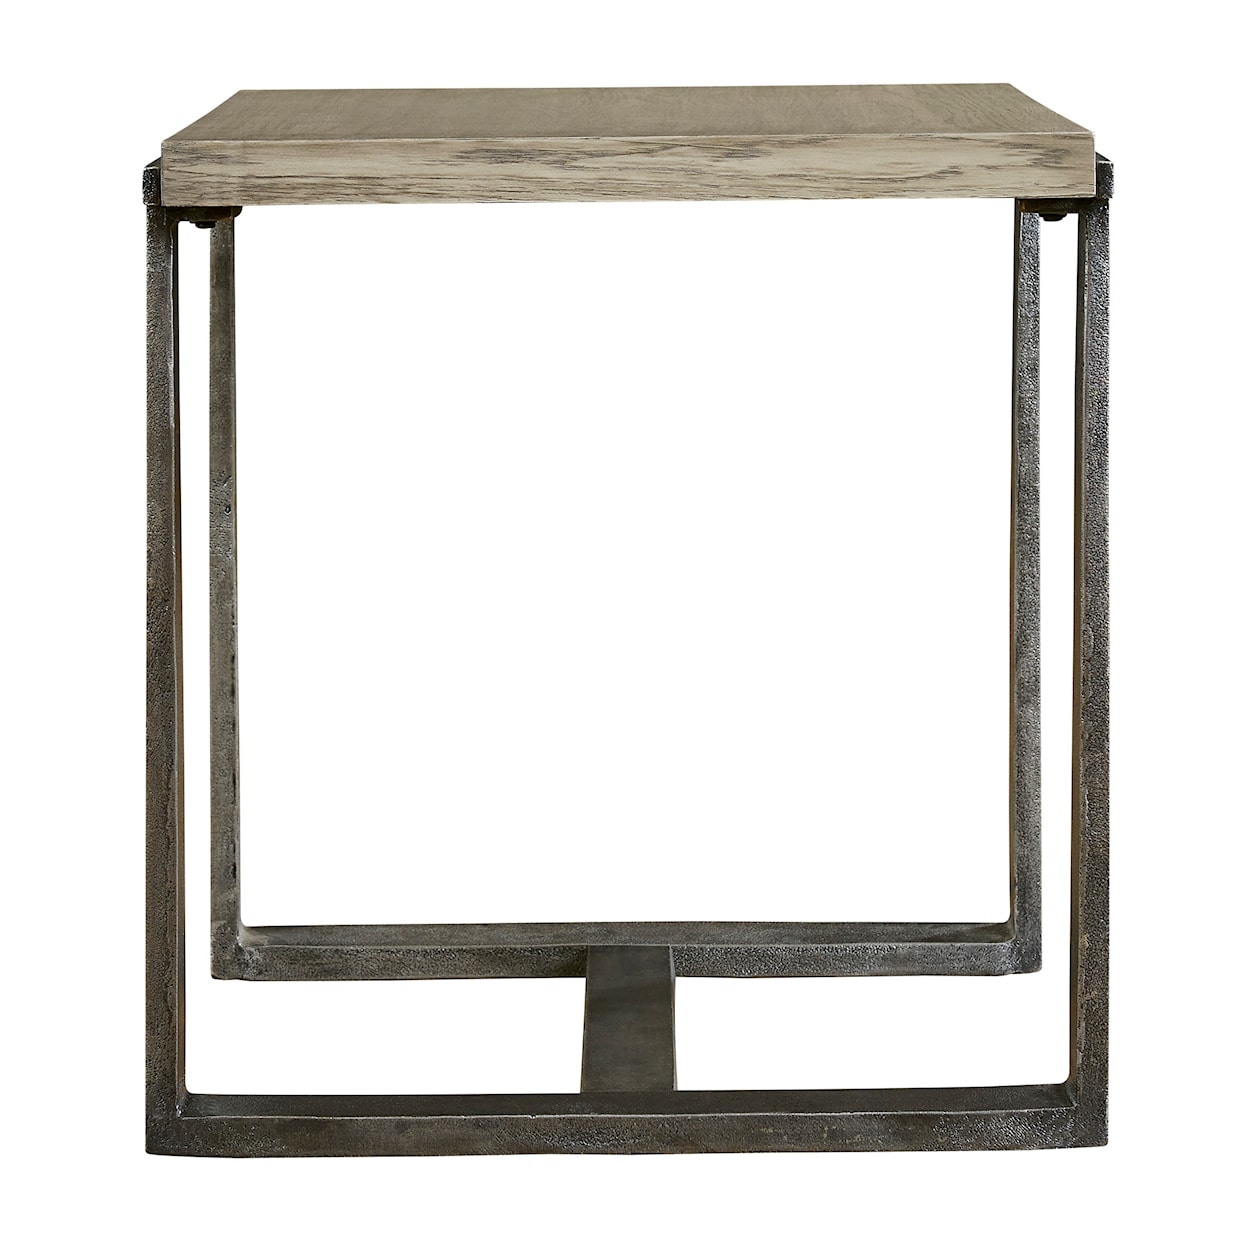 Signature Design by Ashley Dalenville End Table